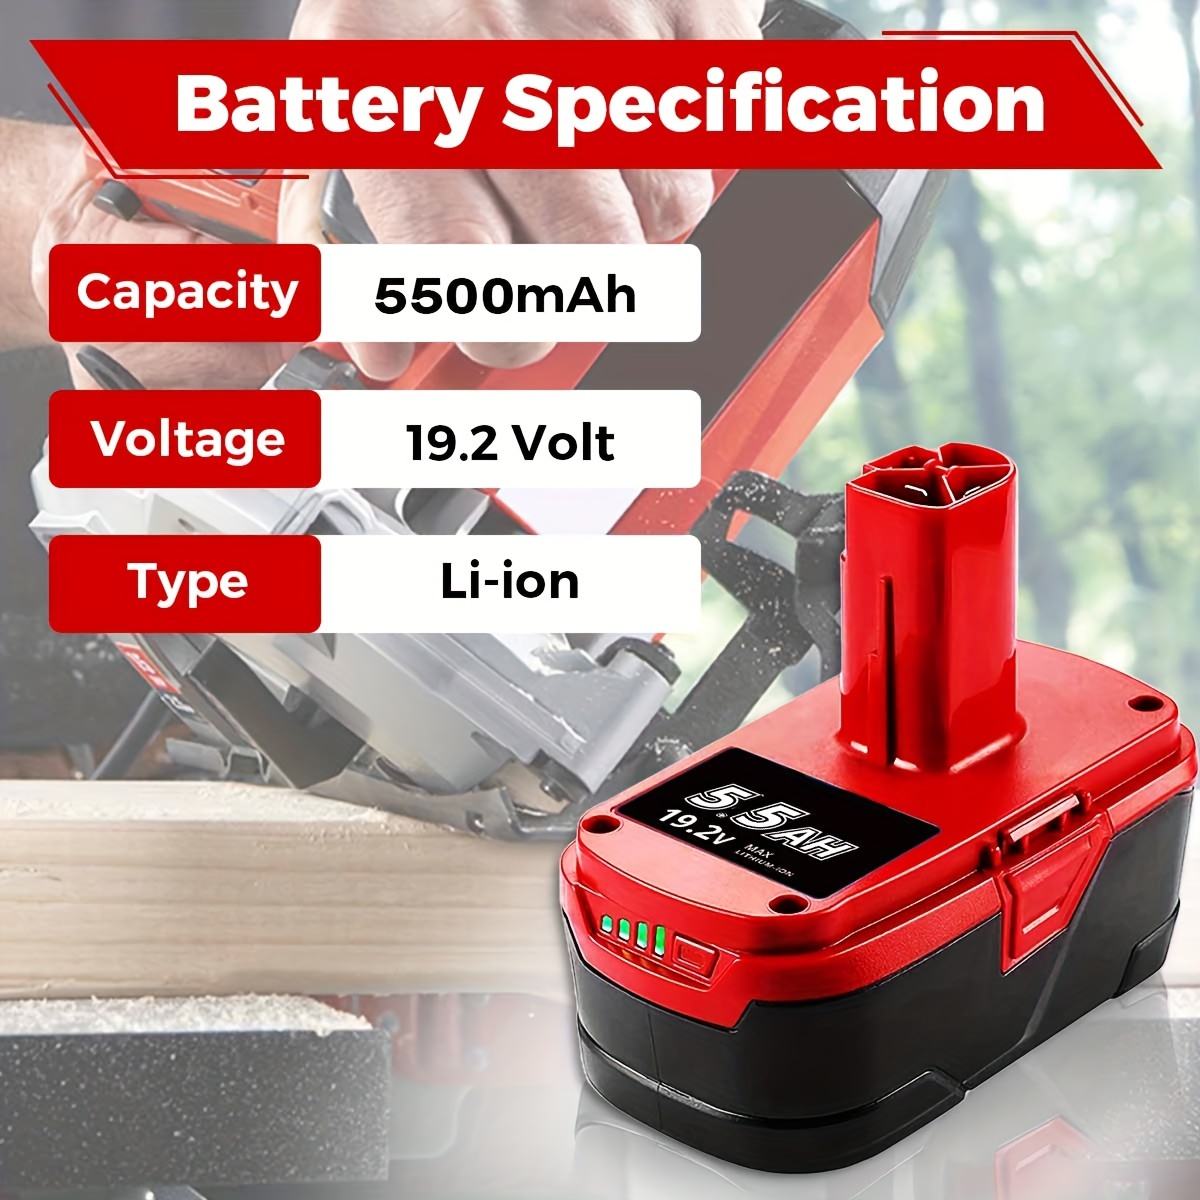 

1pack/2packs 5500mah Upgraded 19.2v 5.5ah Lithium Battery Replace For Craftsman 19.2 Volt Battery Diehard Xcp 3130211004 130279005 11375 11045 1323903 315.115410 315.11485 315.pp2011 Cordless Battery